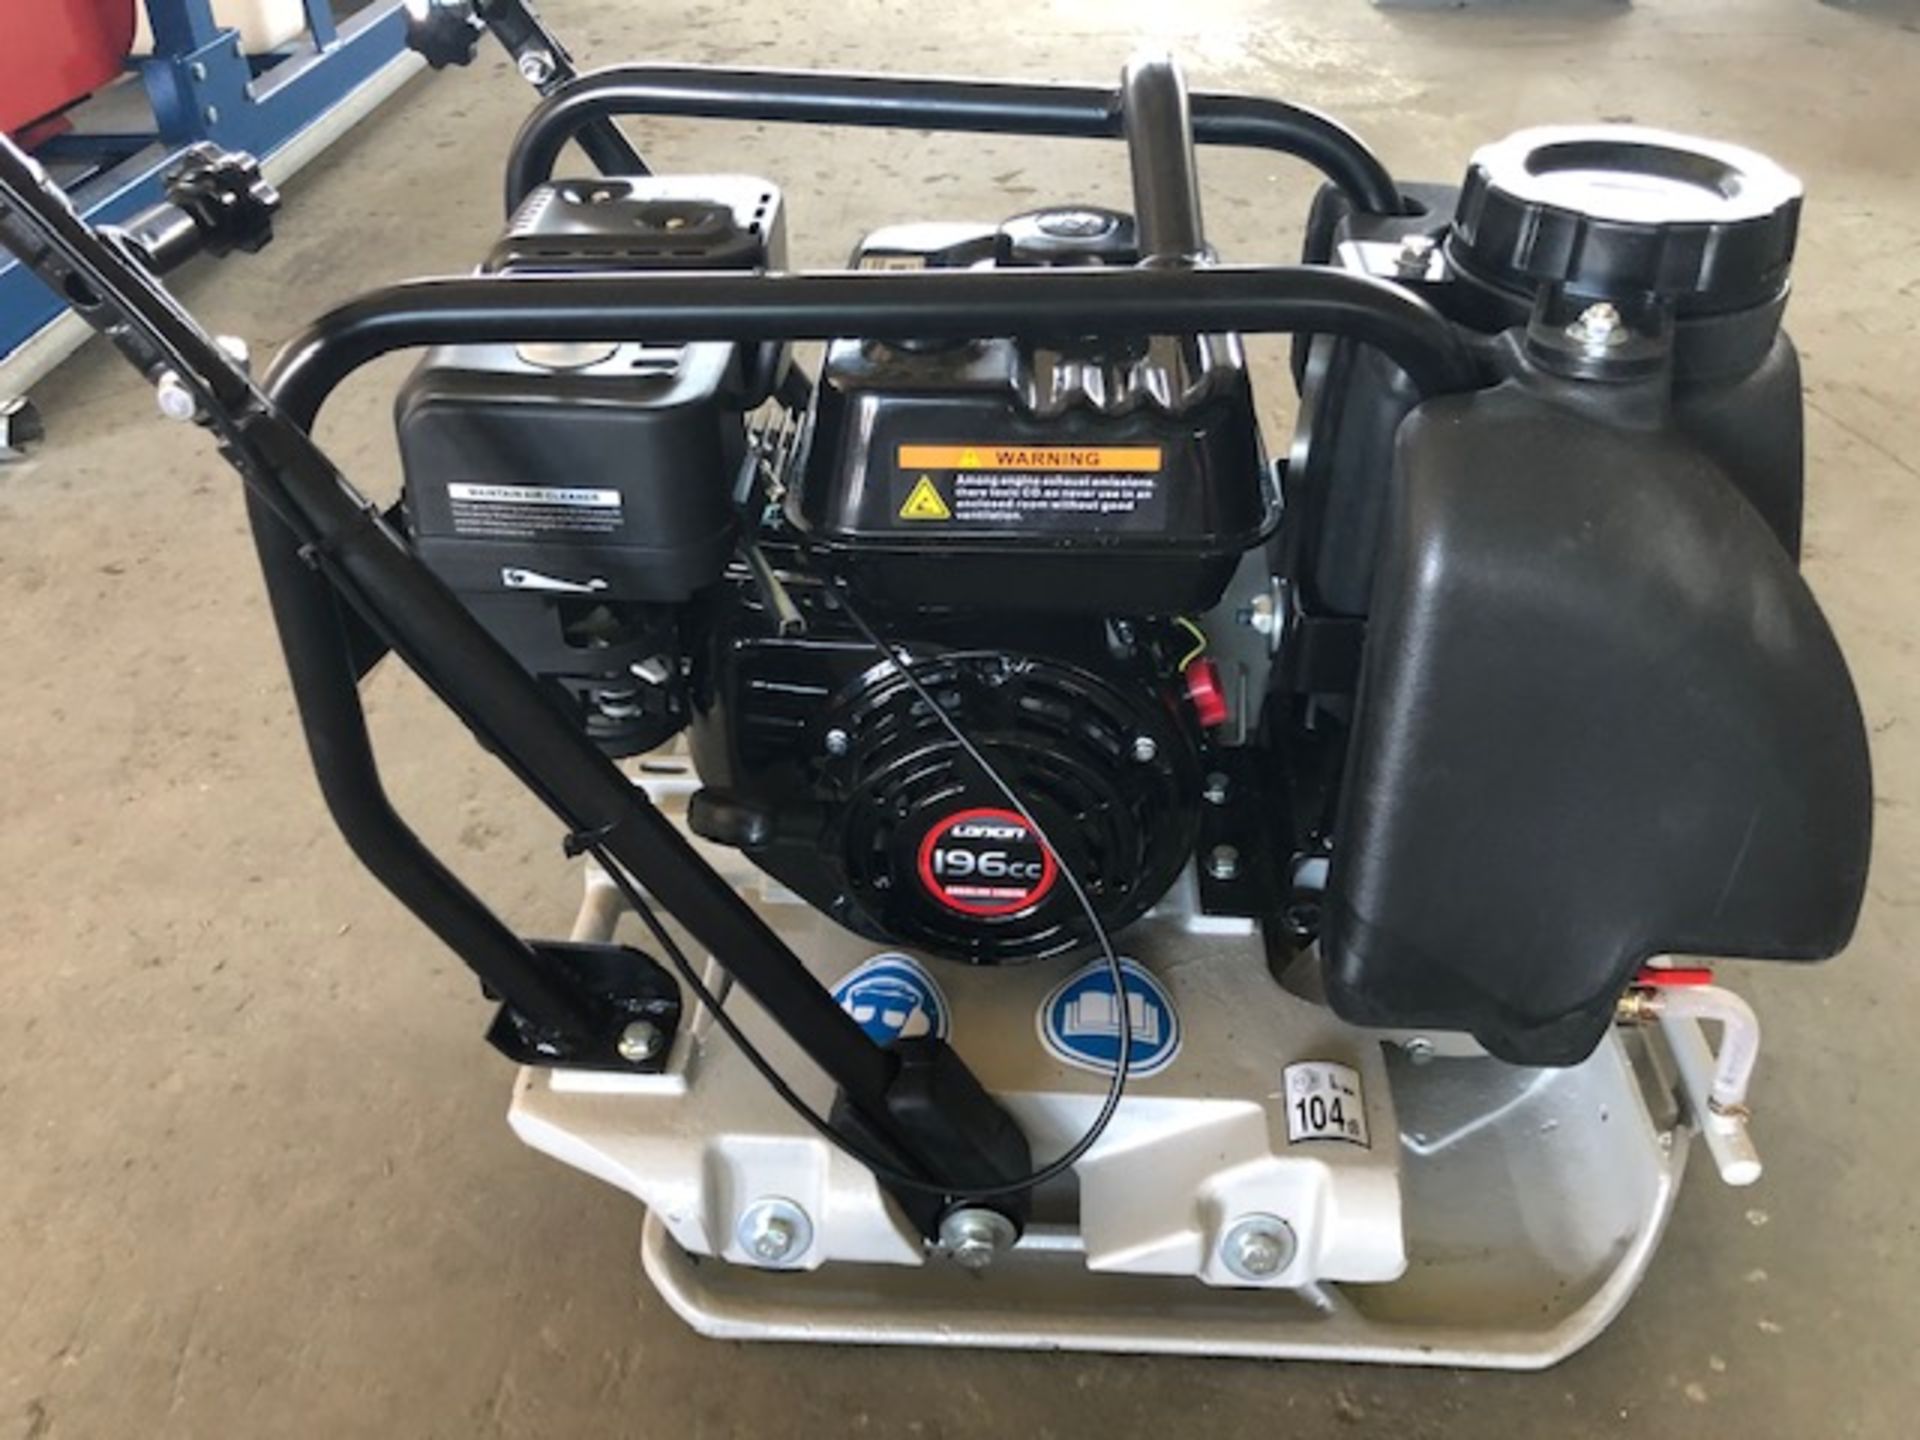 2020 Mustang LF-88 Plate Compactor - Image 4 of 5